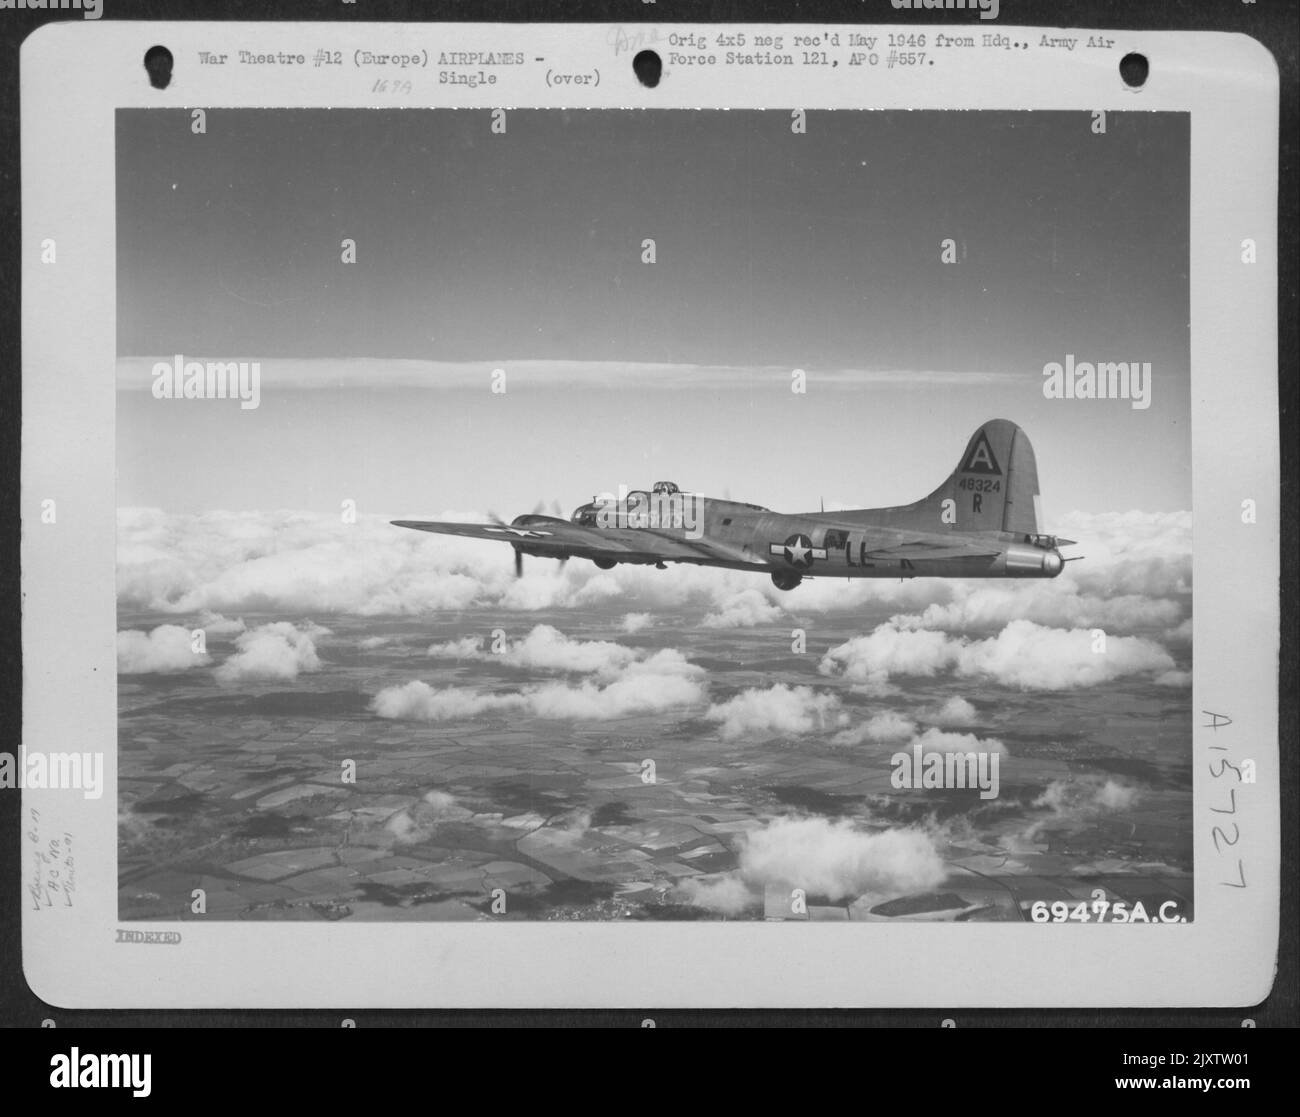 Boeing B-17 'Flying Fortress' (A/C No. 48324) Of The 91St Bomb Group Drones Over Fleecy Clouds Enroute To Bomb Nazi Installations In Europe. Stock Photo